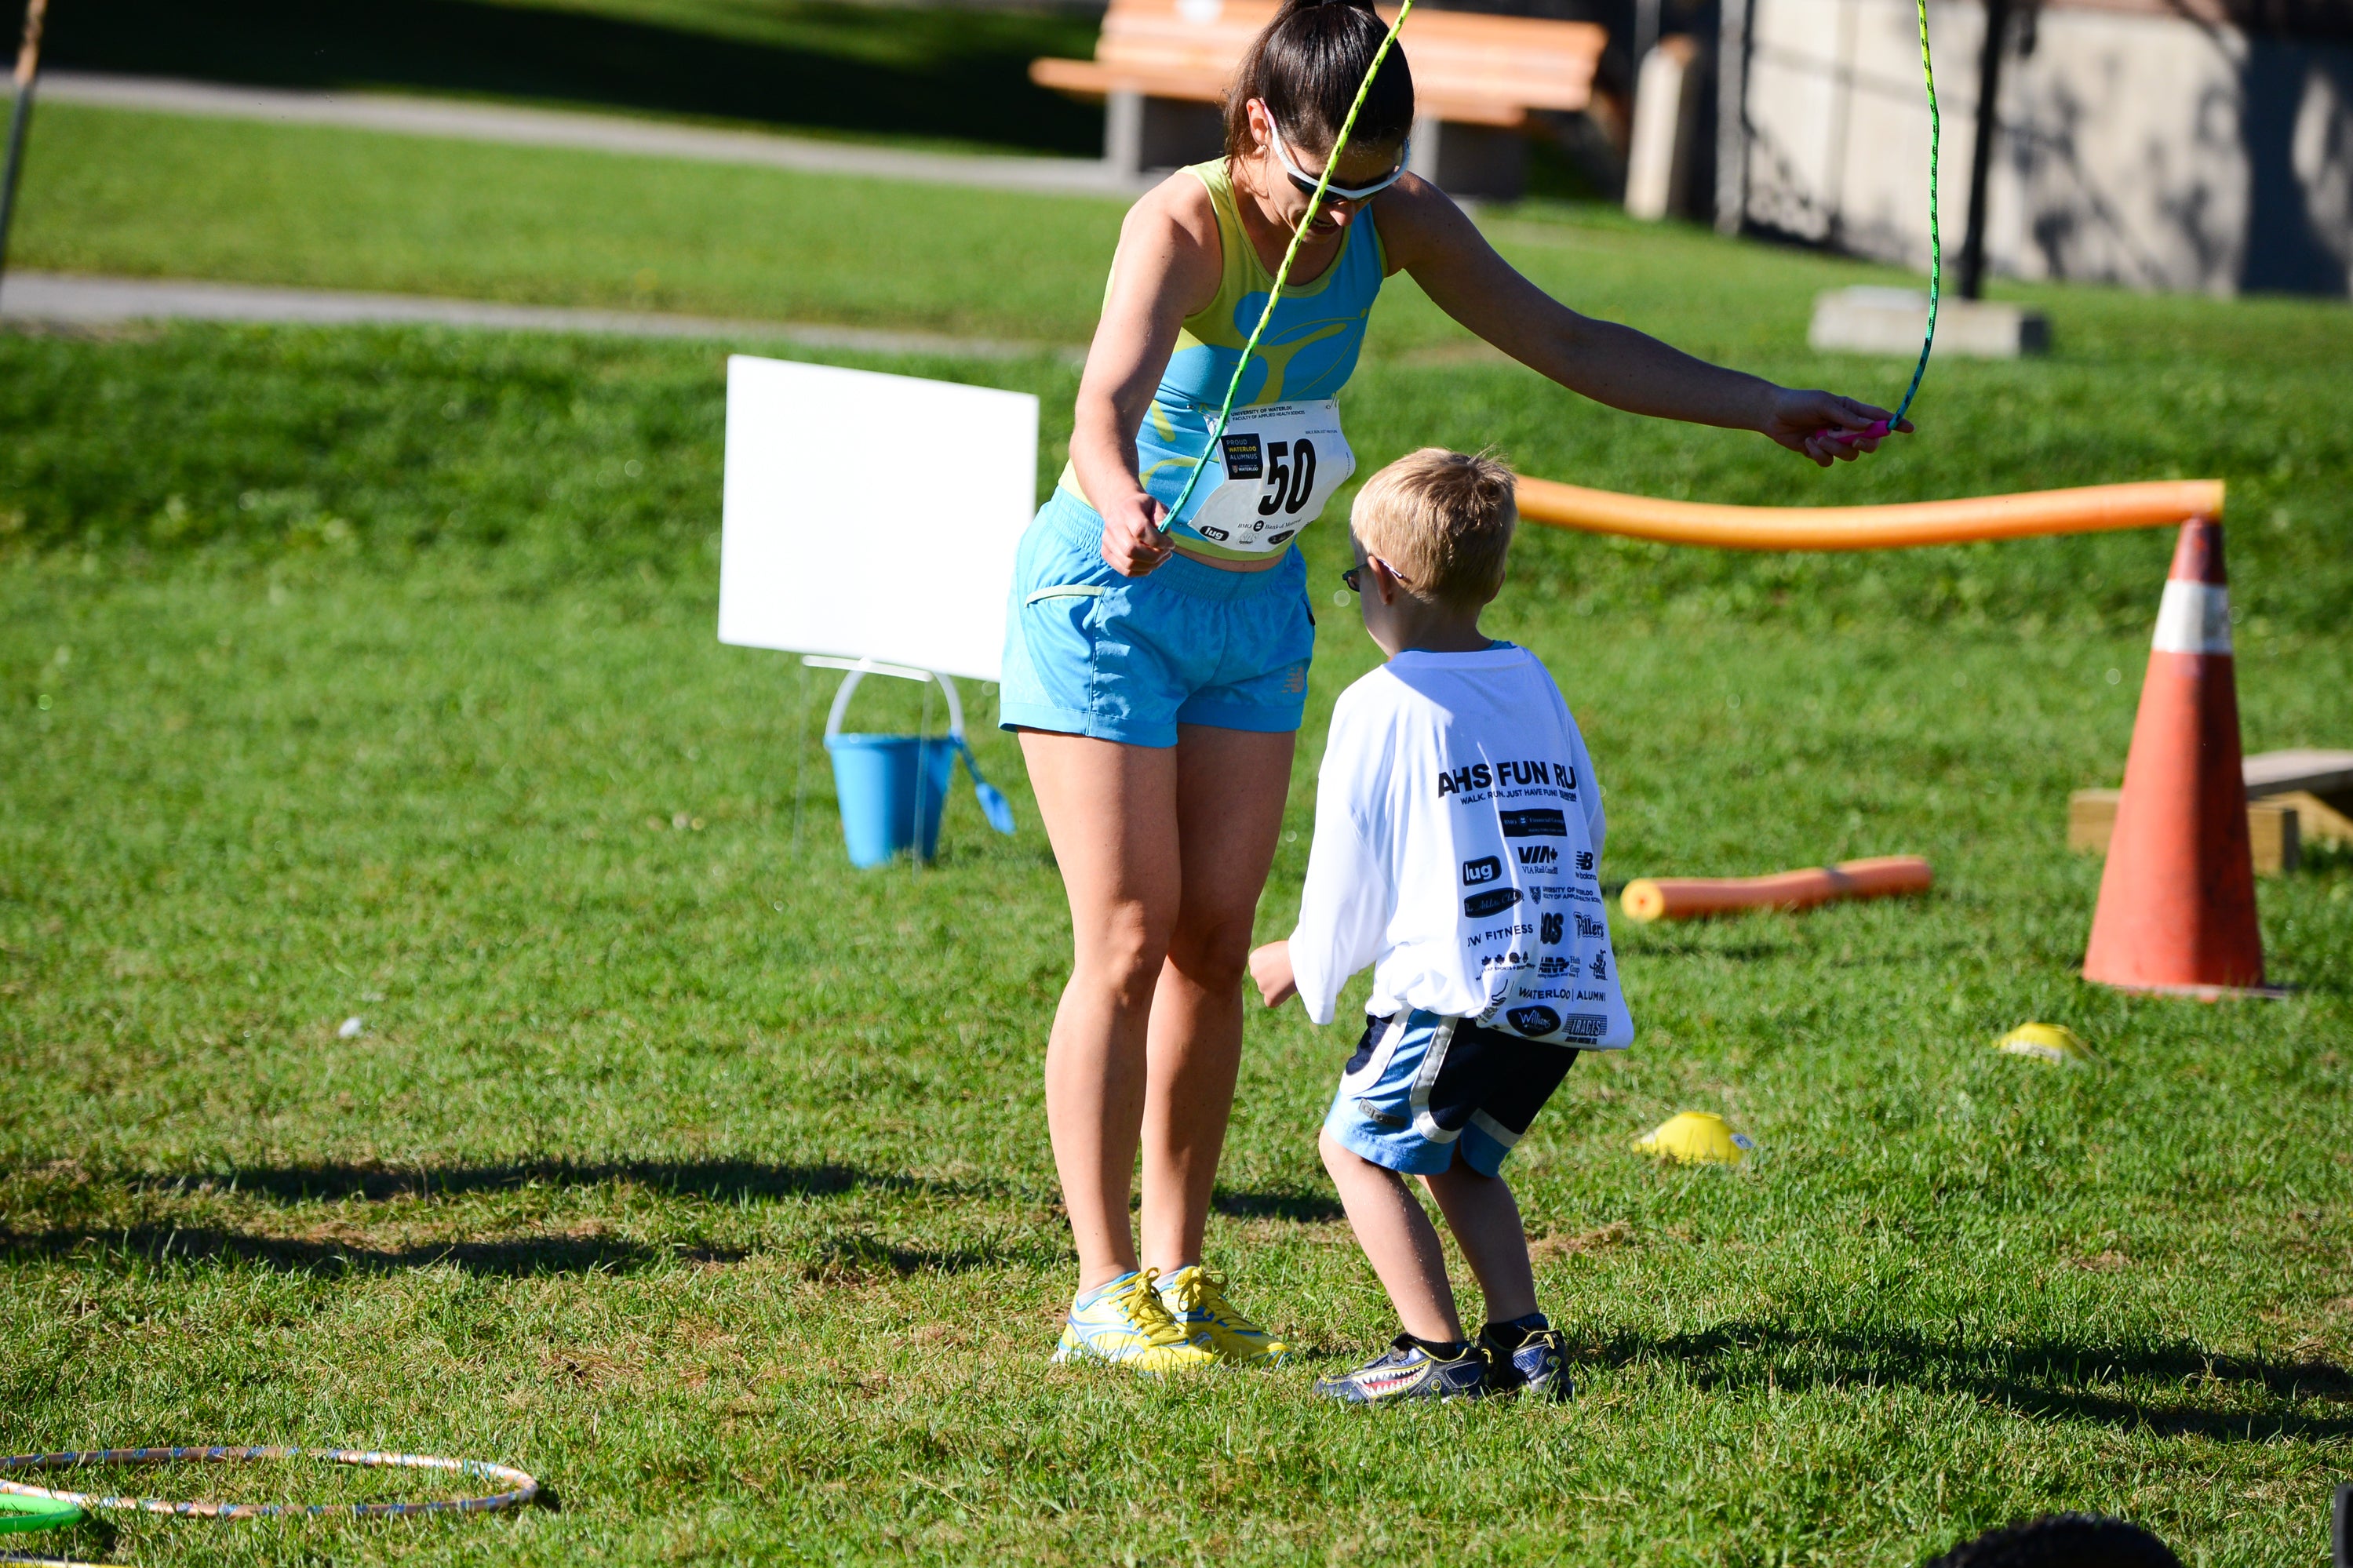 Participant and child jumping rope